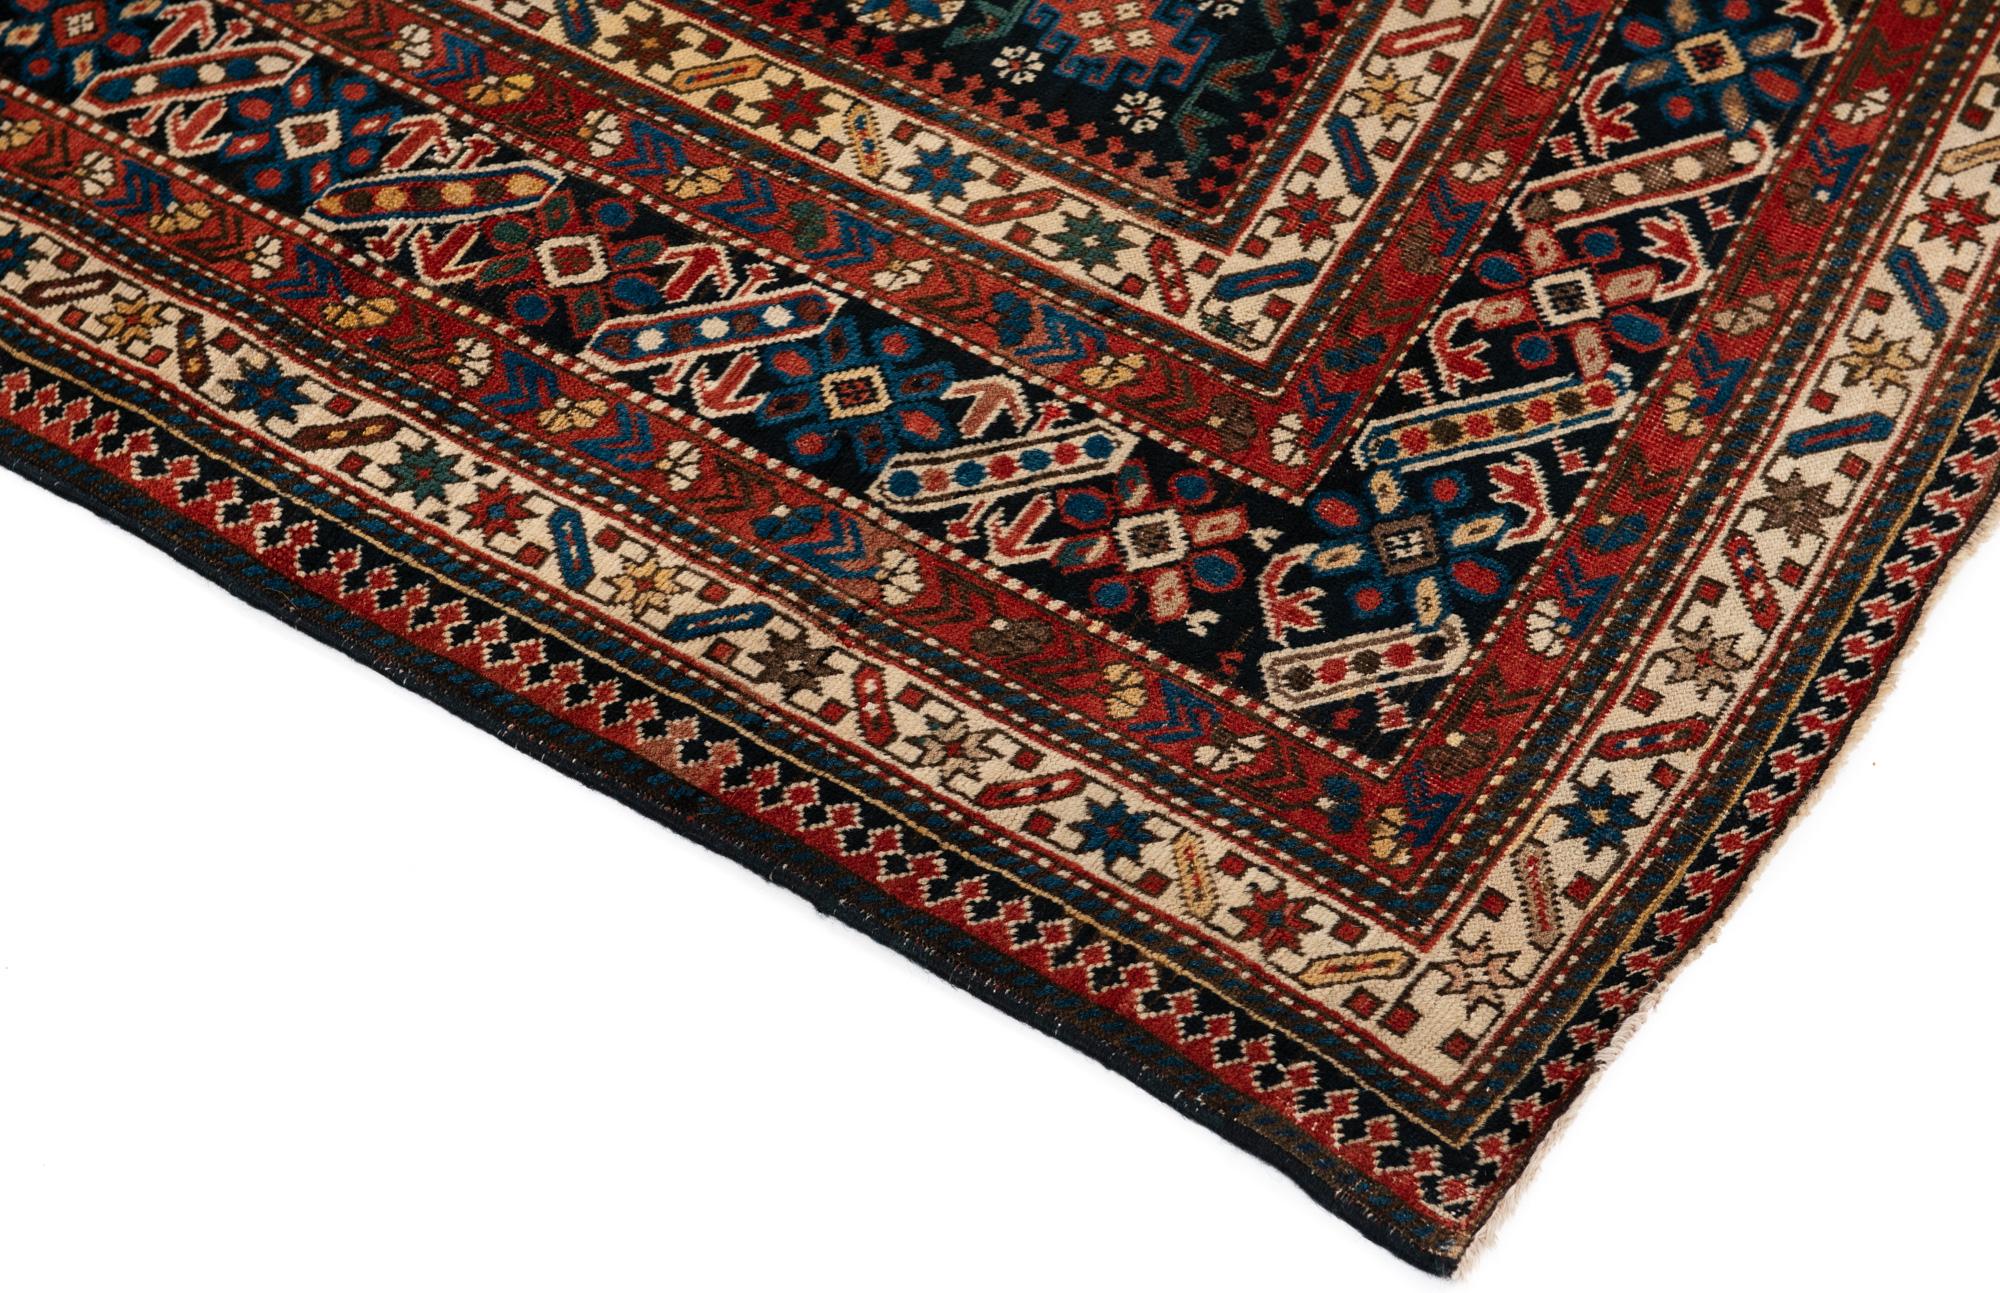 This is a fine example of Northeastern Caucasian rugs from the Kuba district known as Chi-Chi, woven circa 1880. It has a wonderfully intricate main border and matching three minor borders on either side divided by narrower borders adding more